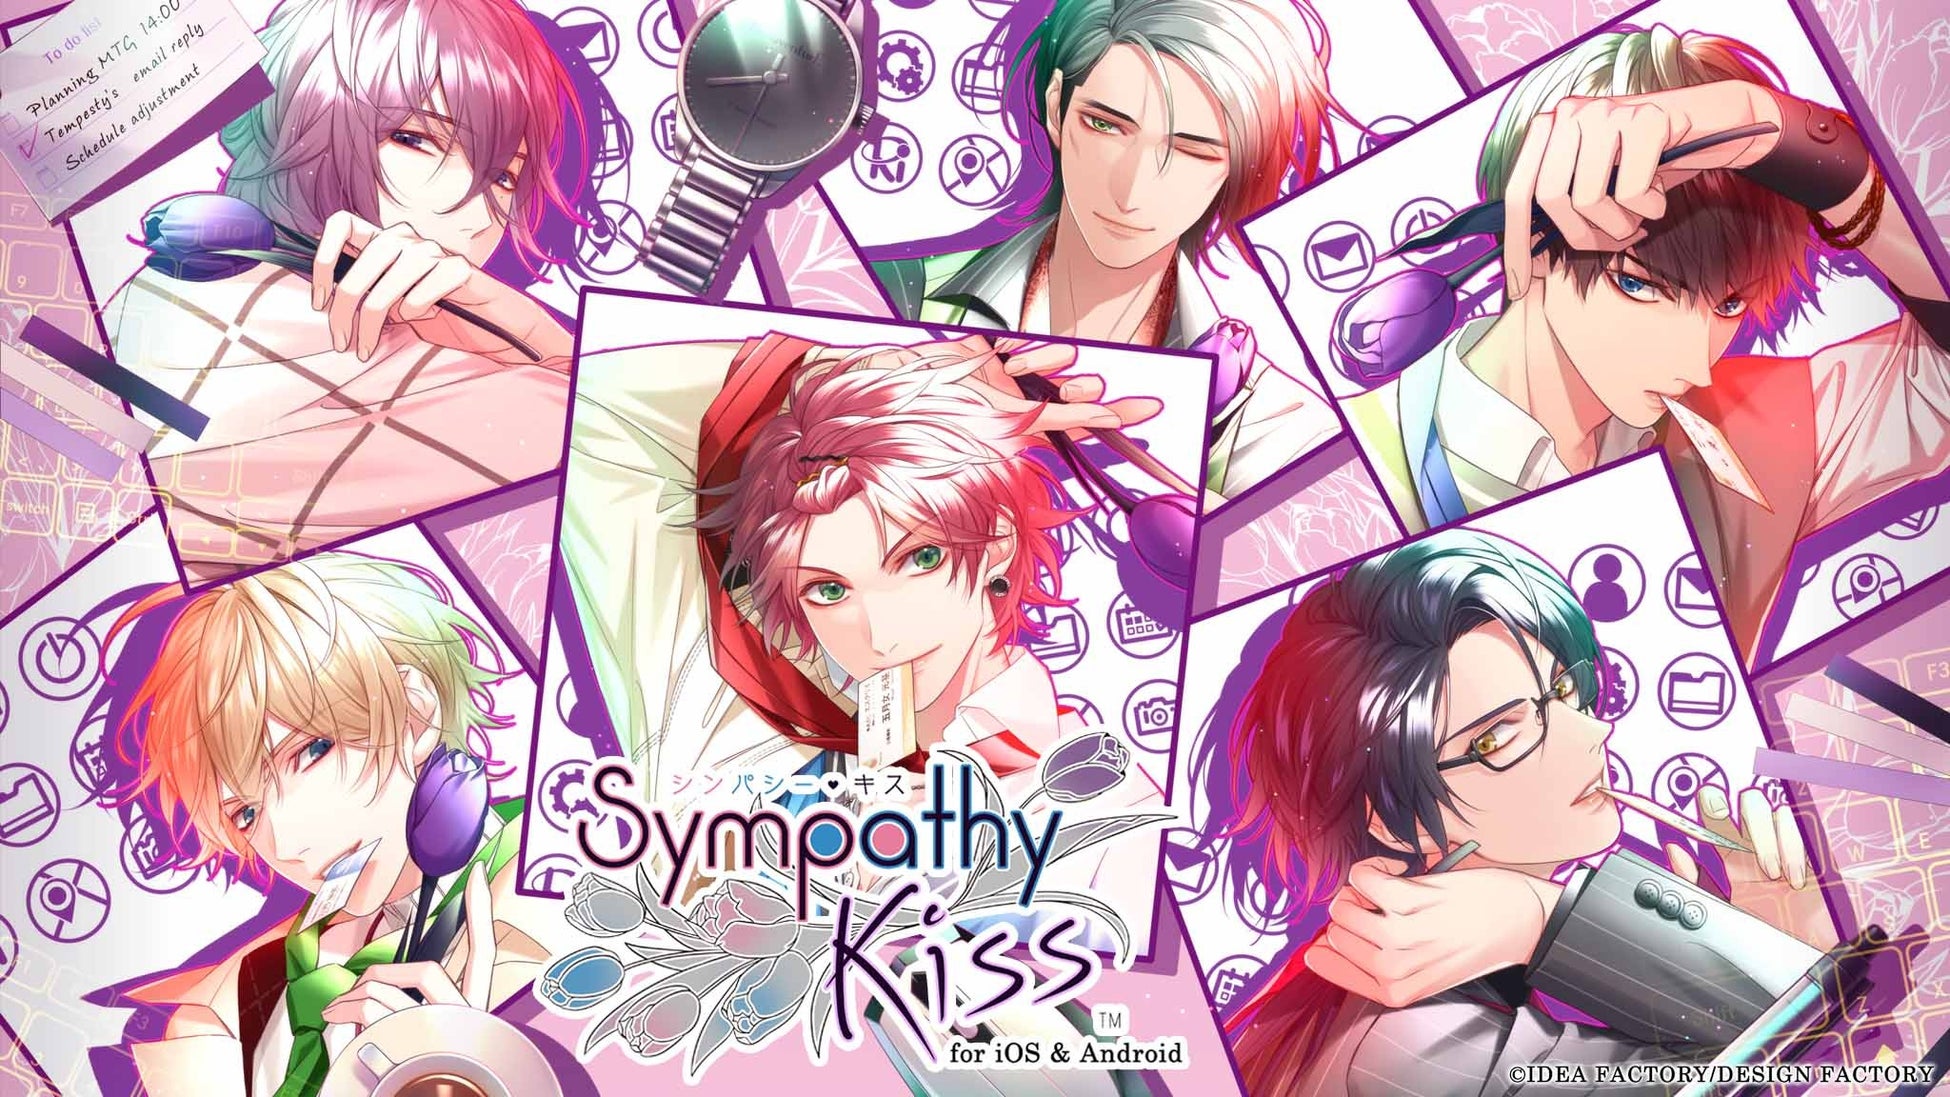 「SympathyKiss for iOS & Android」配信開始